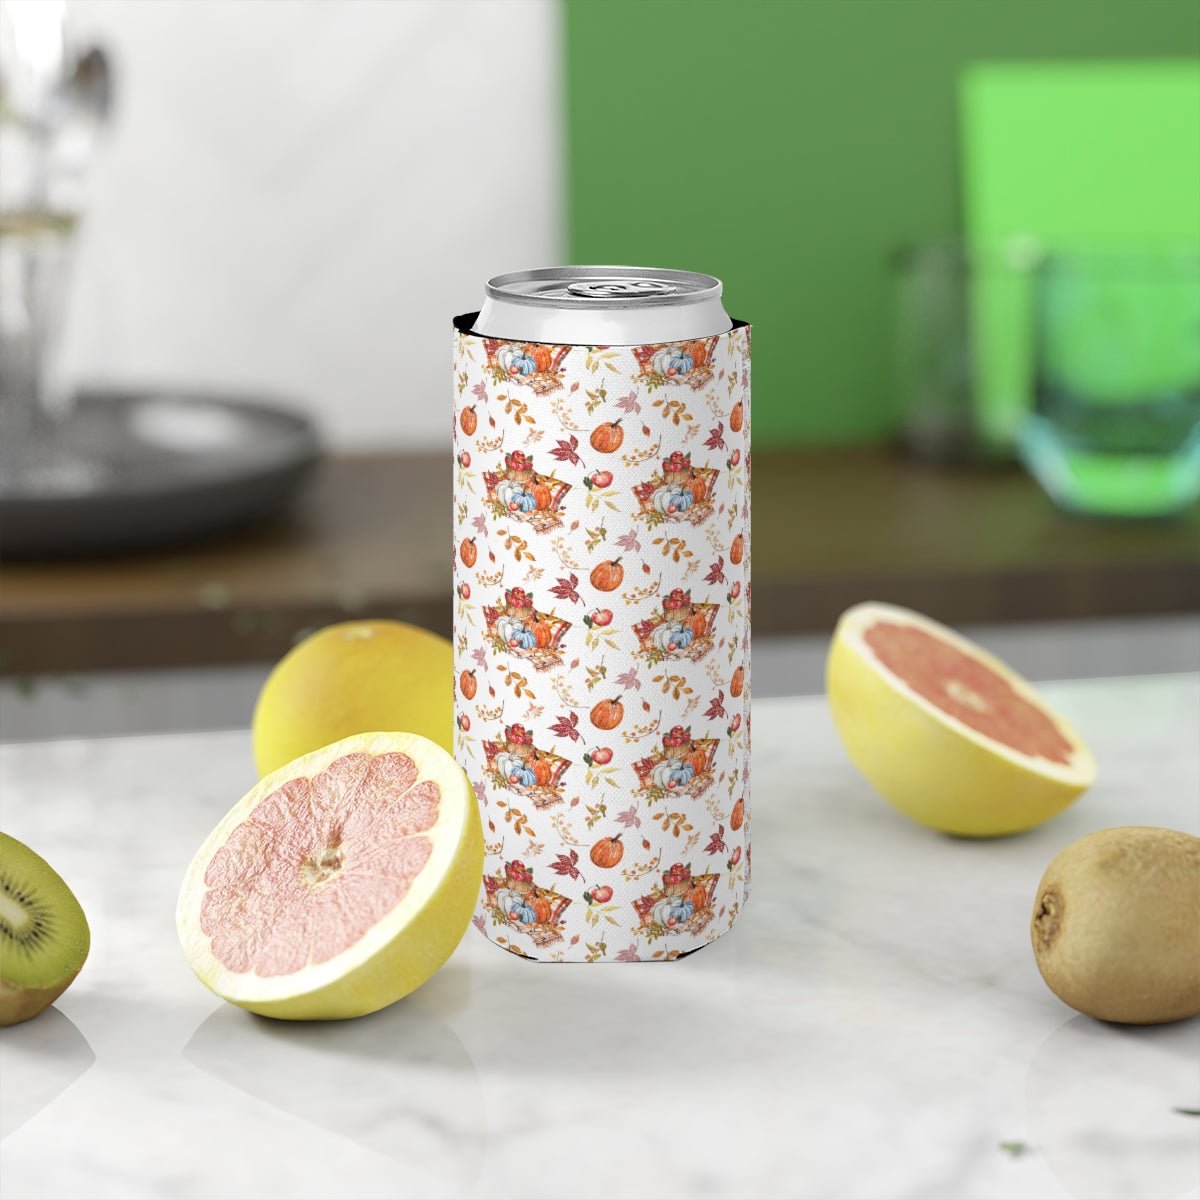 Fall Pumpkins and Apples Slim Can Cooler - Puffin Lime